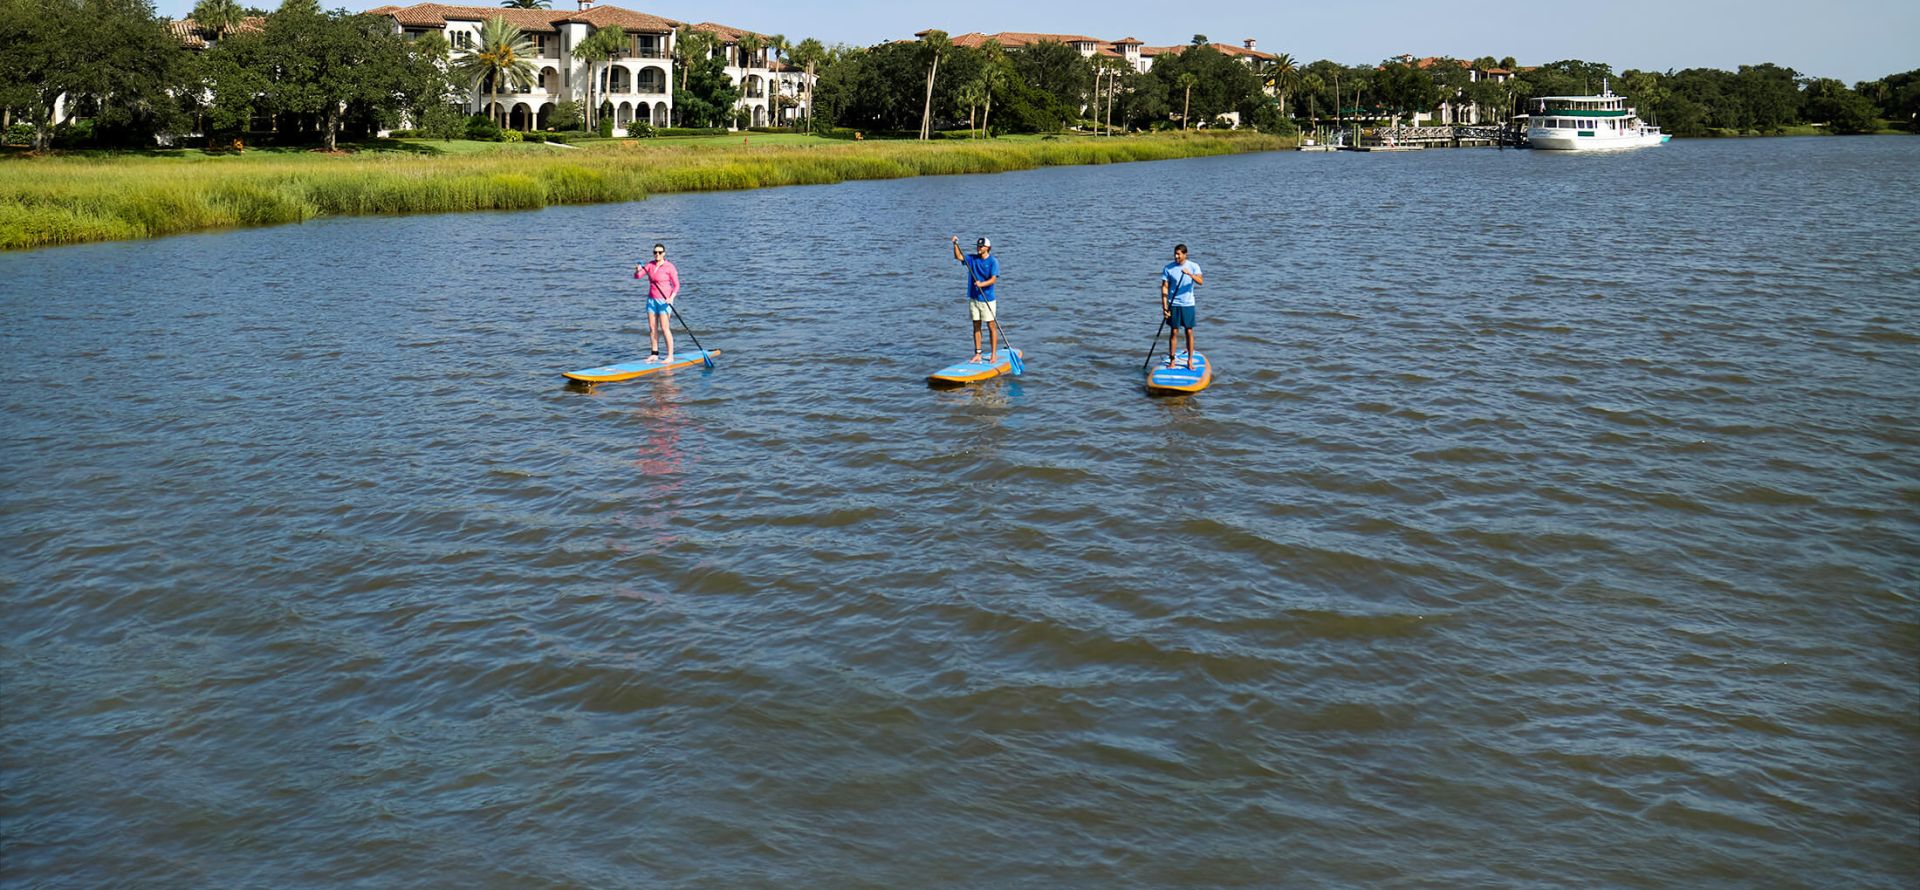 Stand-Up Paddleboarding Lessons